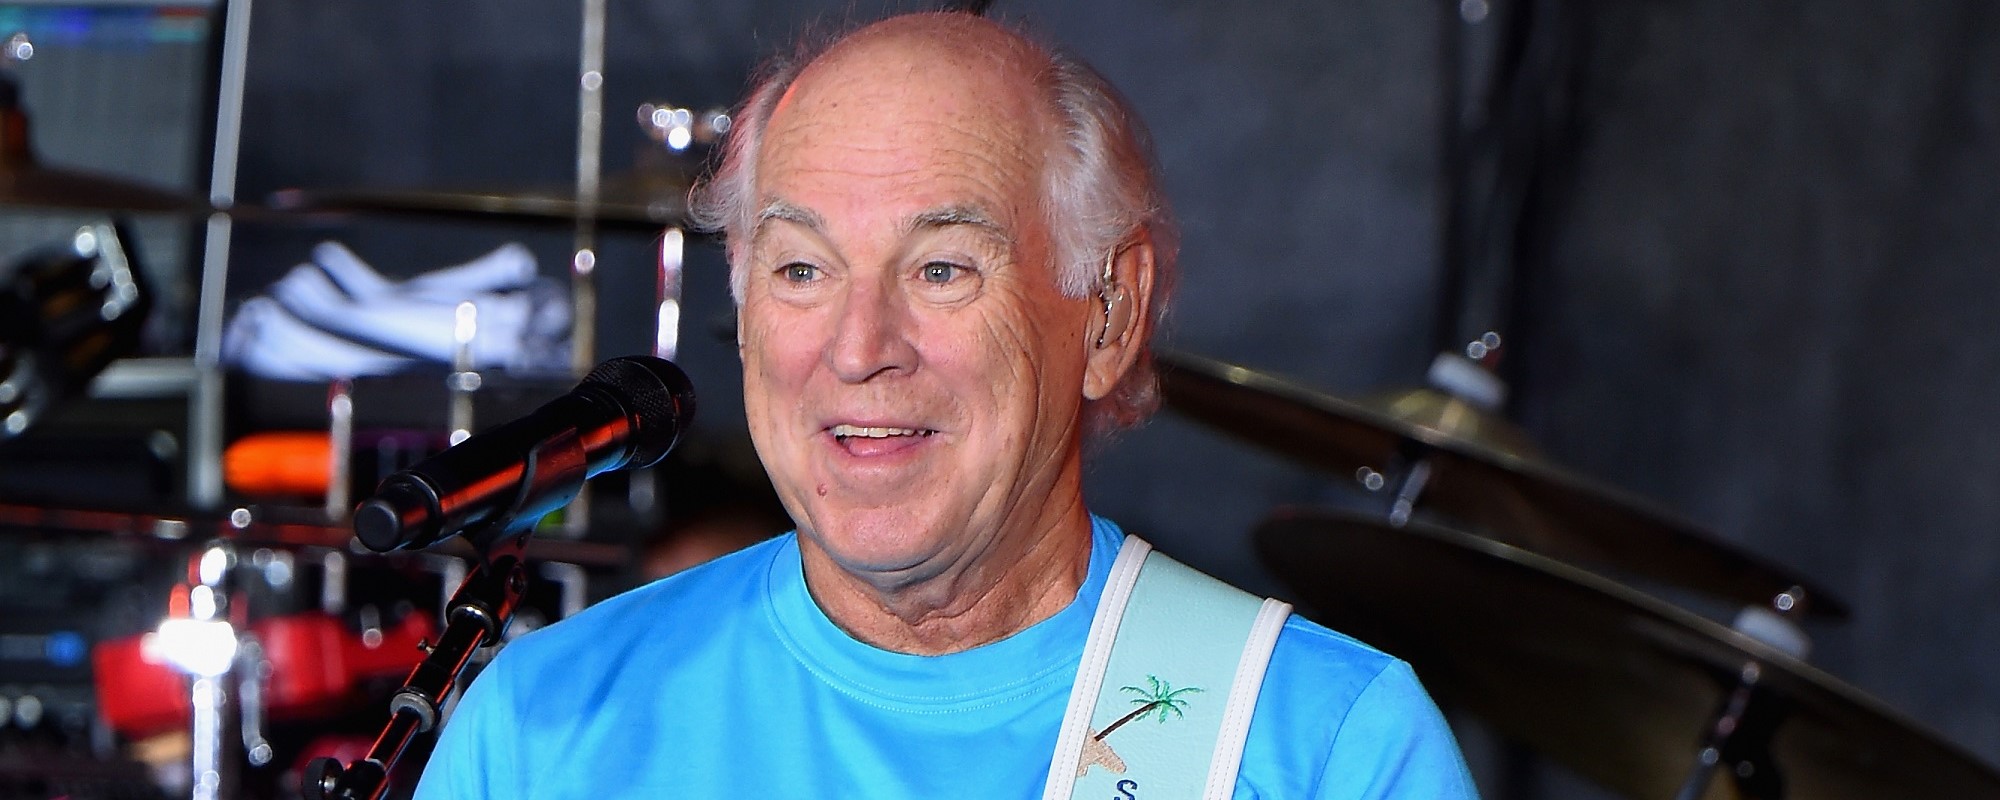 Jimmy Buffett to Be Celebrated with Vinyl Reissue Campaign Featuring 10 of His Albums